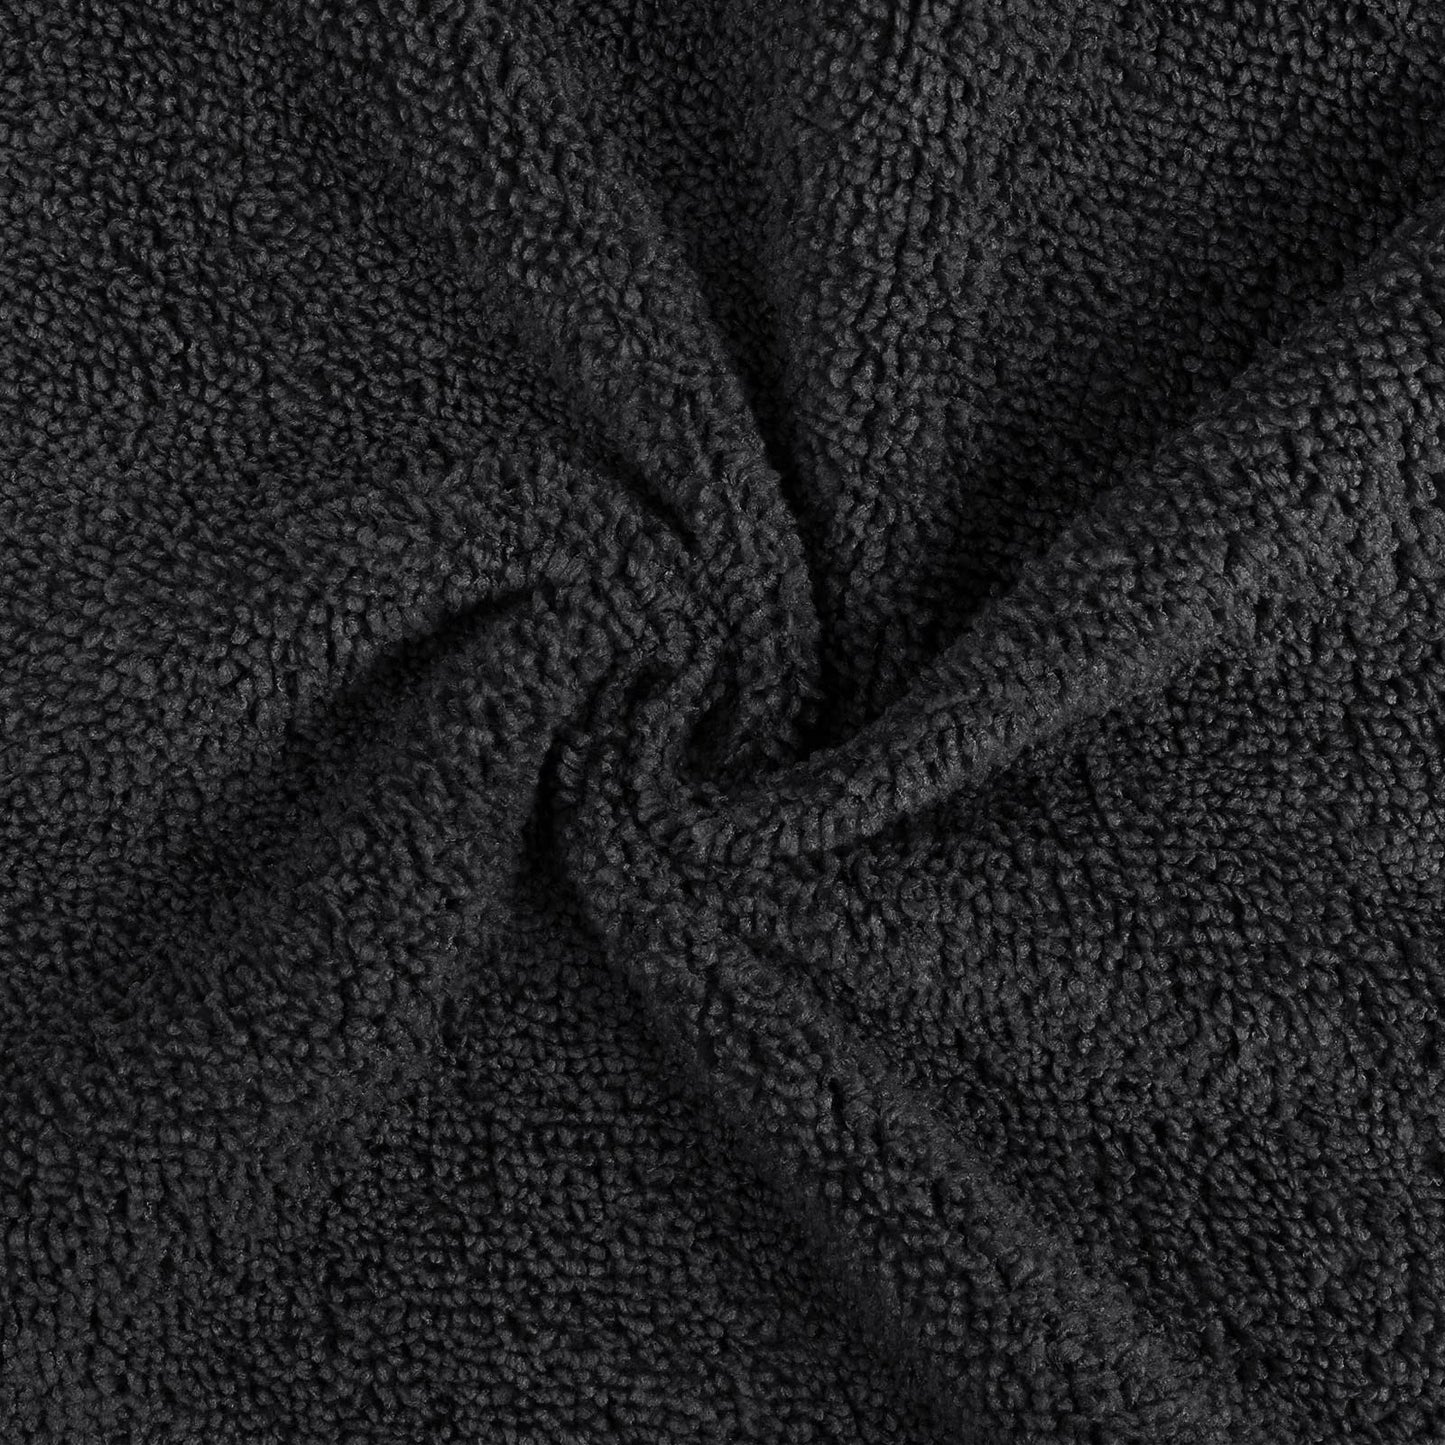 Orighty Microfiber Washcloths Towels Set 50 Pack, Highly Absorbent and Super Soft Fingertip Towels, Multi-Purpose Wash Cloths for Bathroom, Hotel, Spa, and Gym, 12x12 Inch, Black